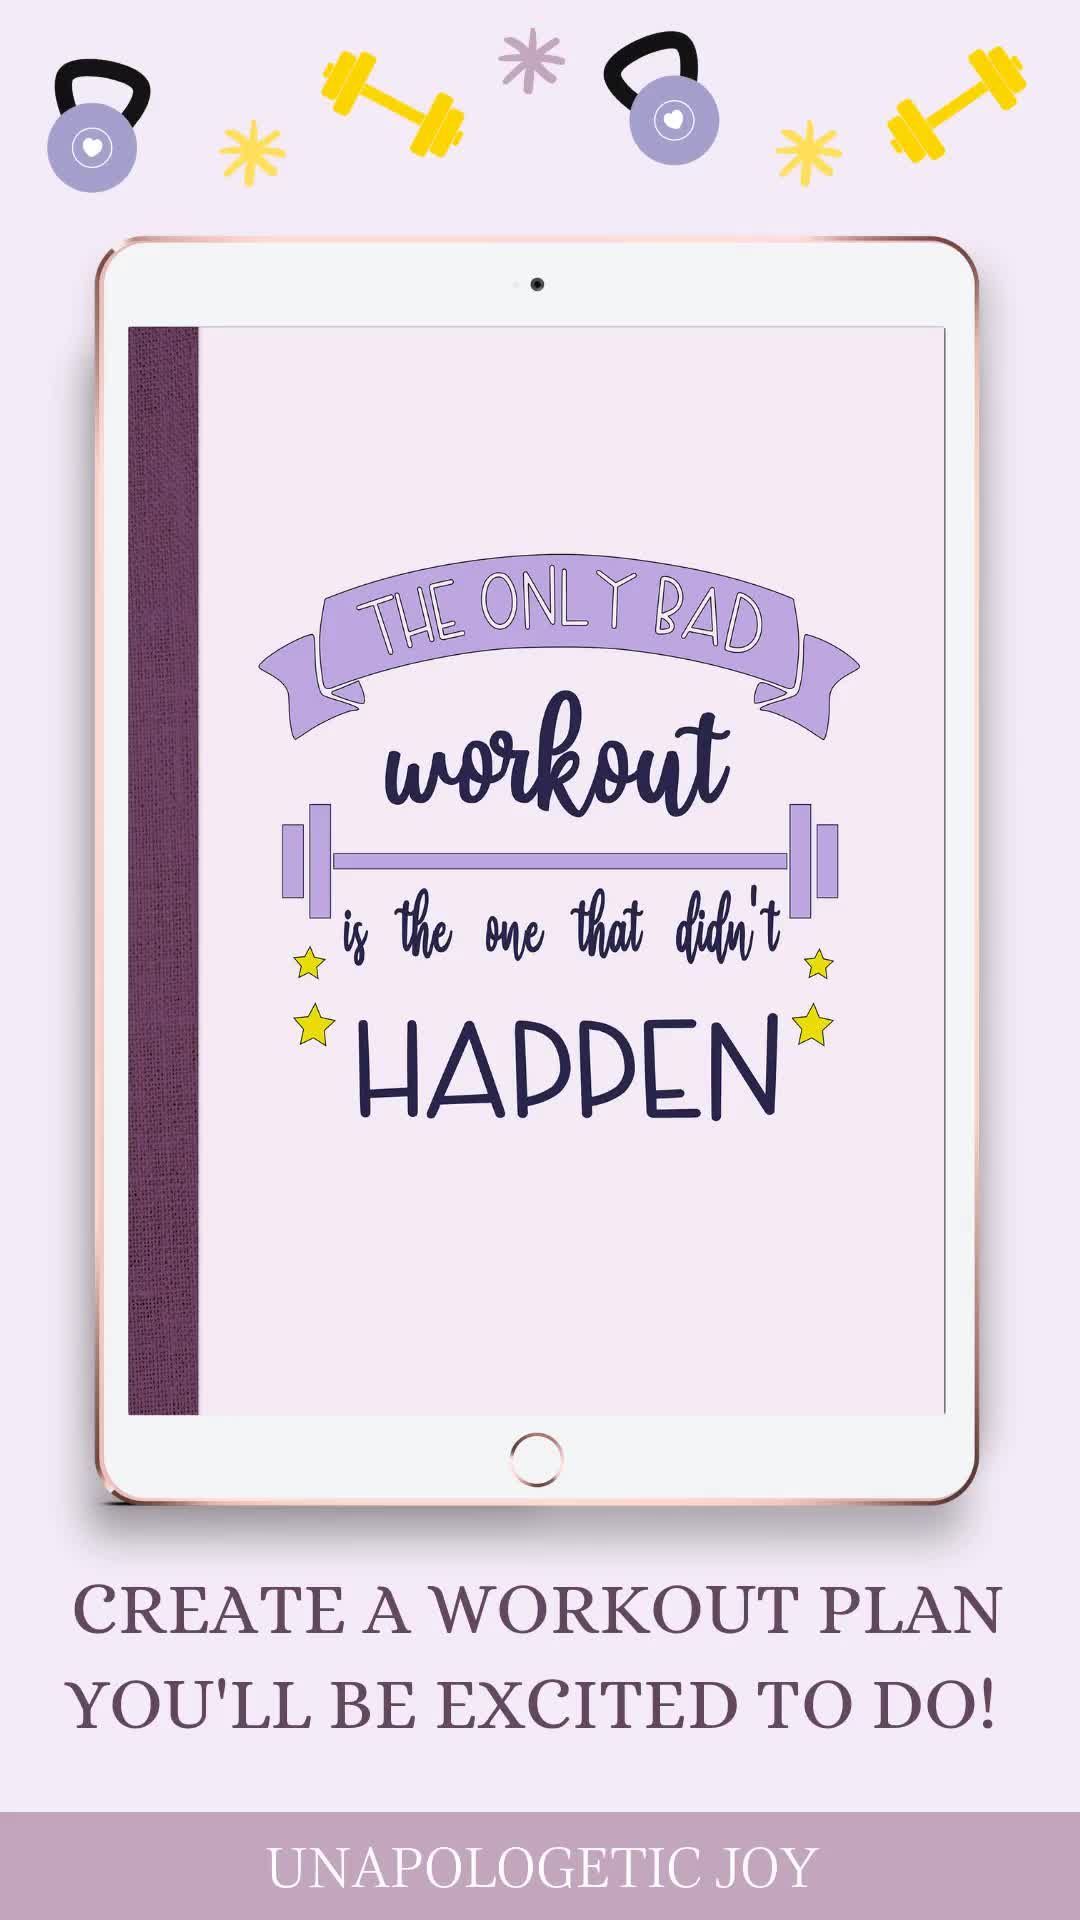 No Bad Workout Digital Fitness Planner - No Bad Workout Digital Fitness Planner -   17 fitness Planner gratuit ideas